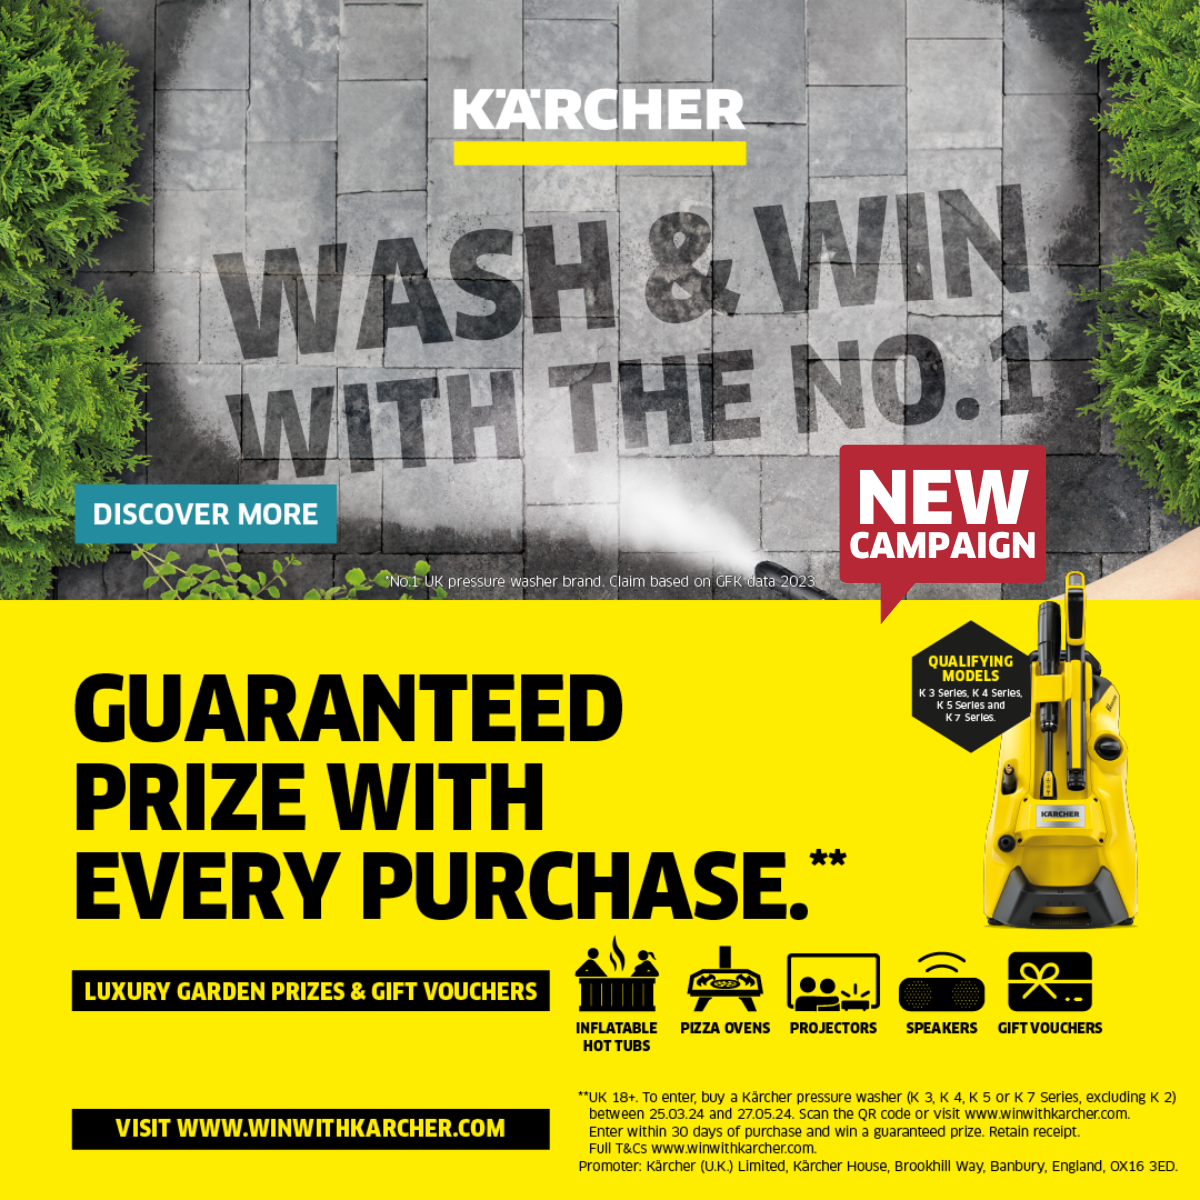 Wash & Win with Karcher